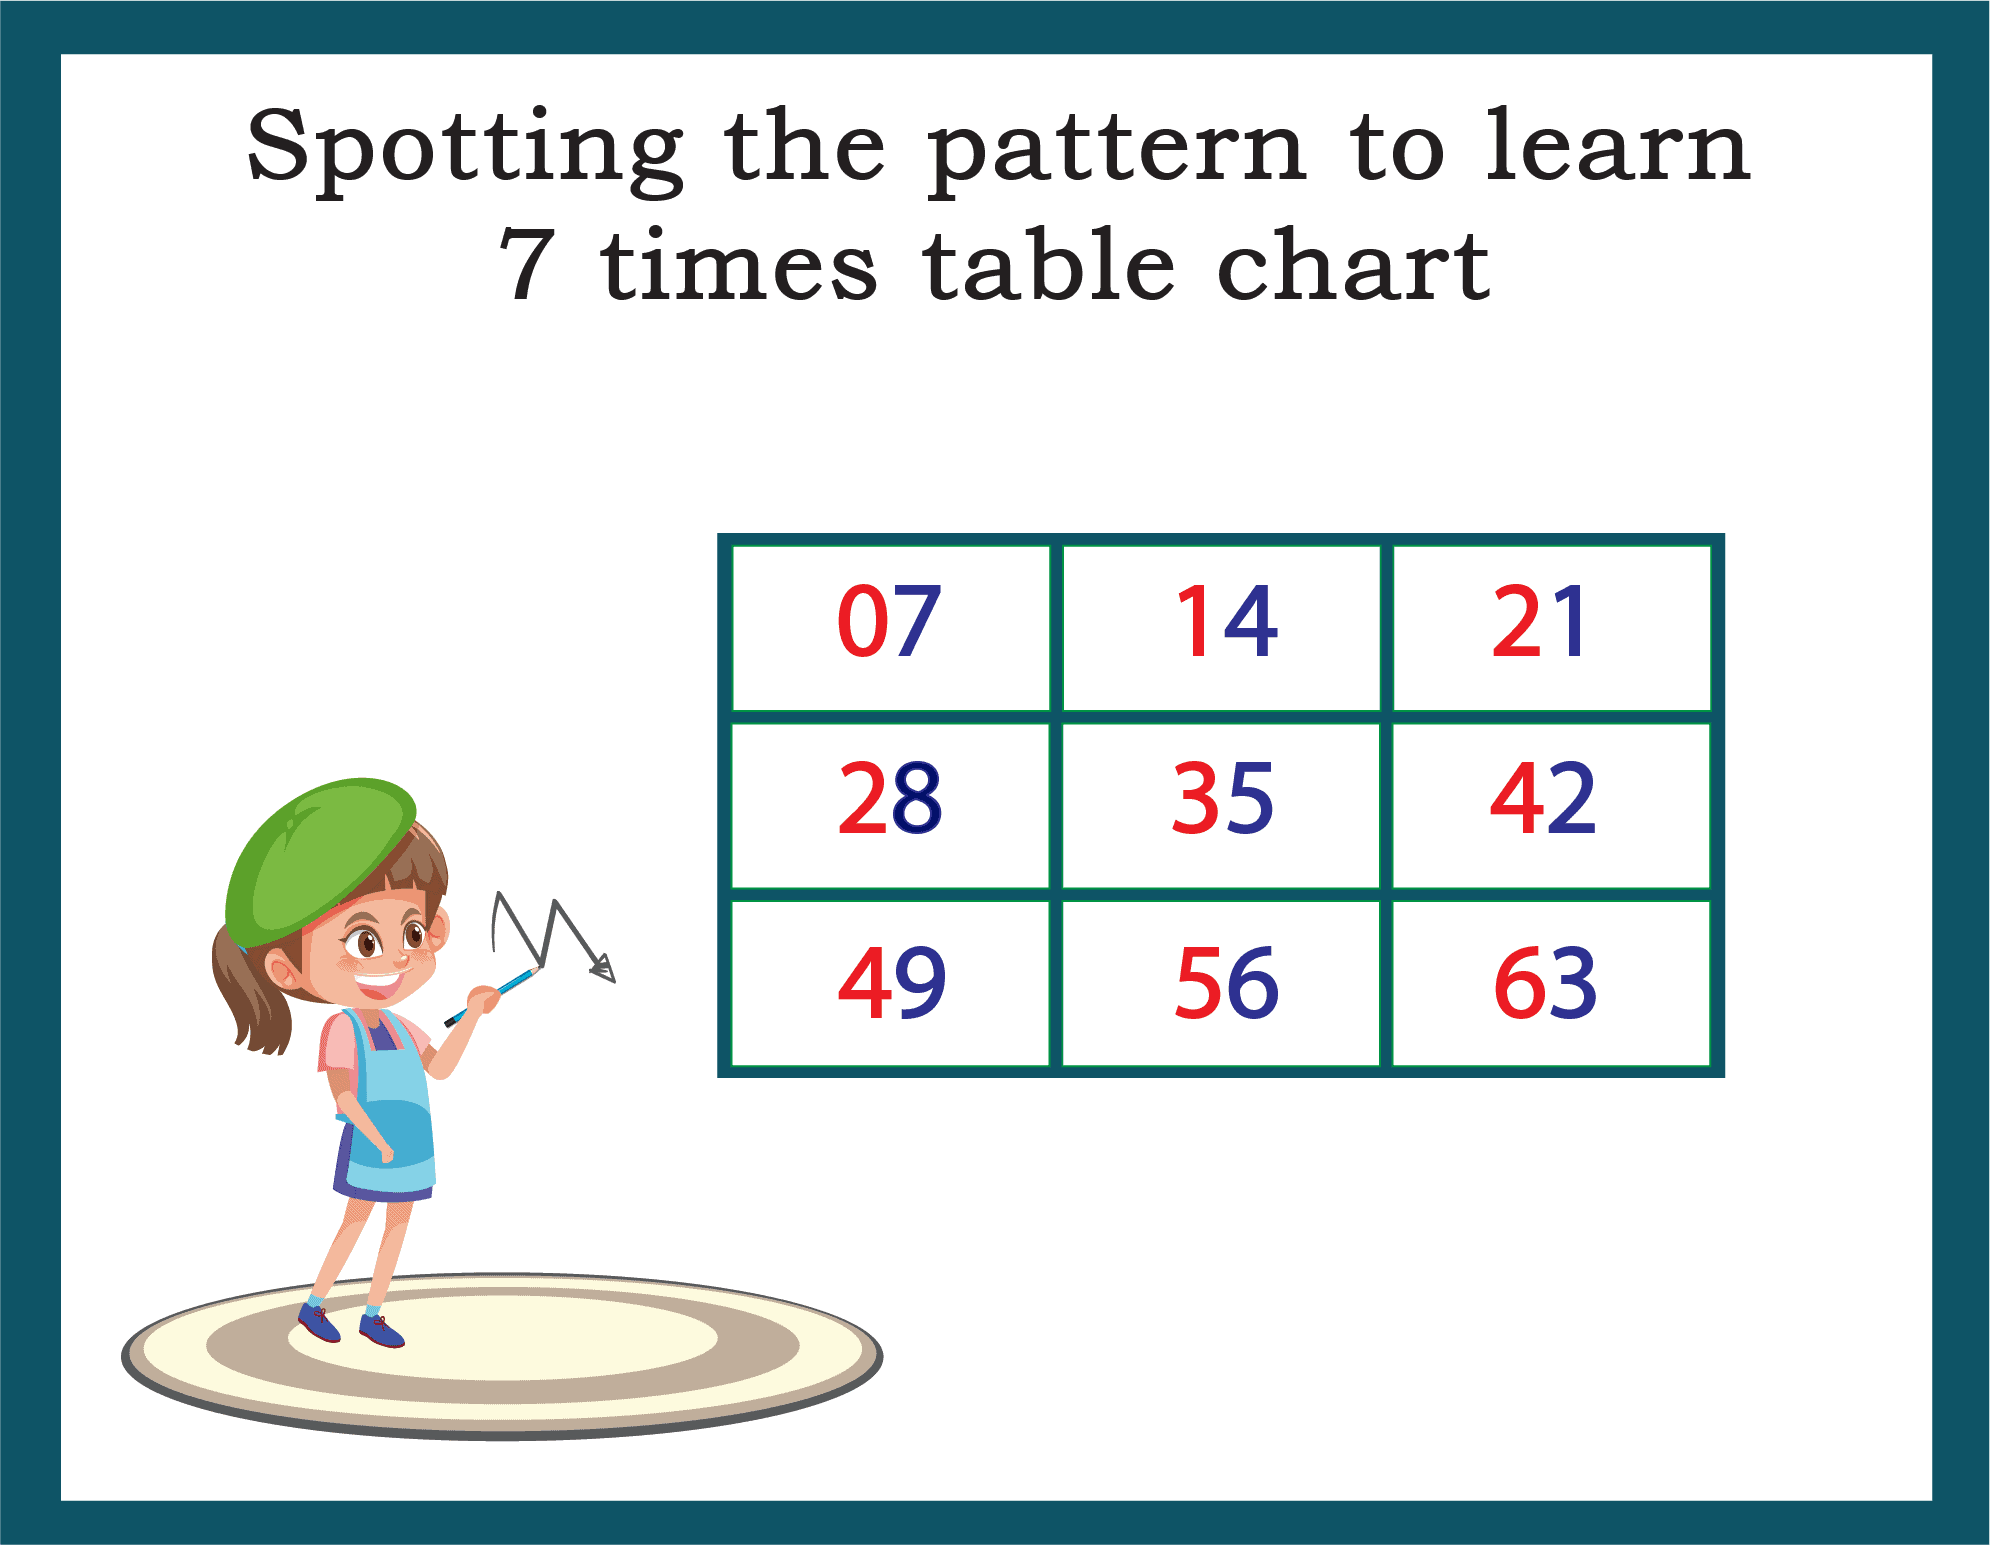 using pattern to learn 7 times table chart